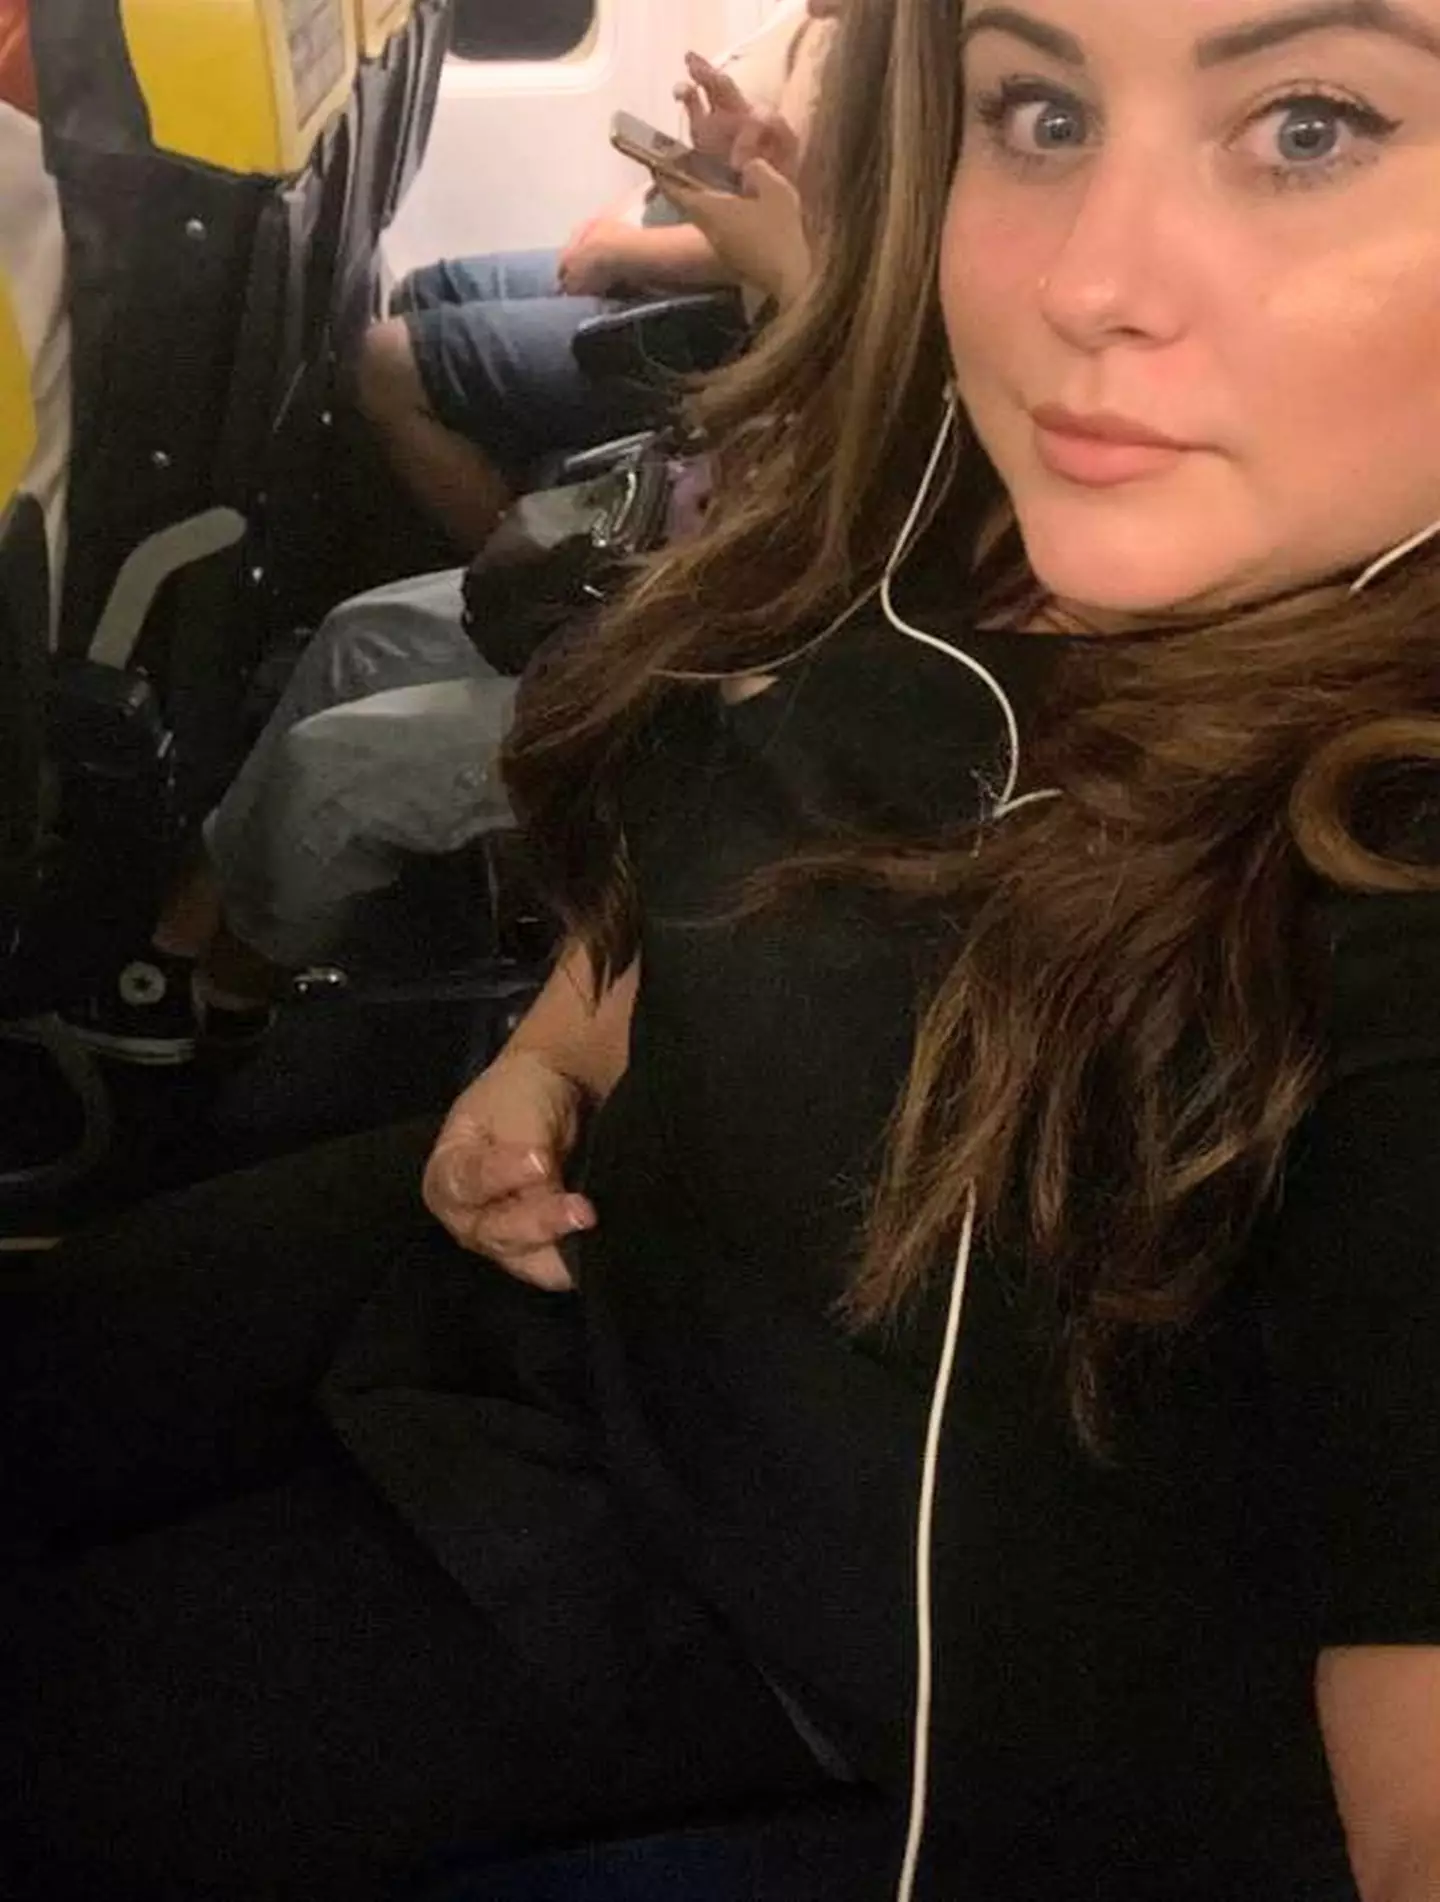 Katie Higgins has criticised Ryanair for not providing bigger seatbelts.